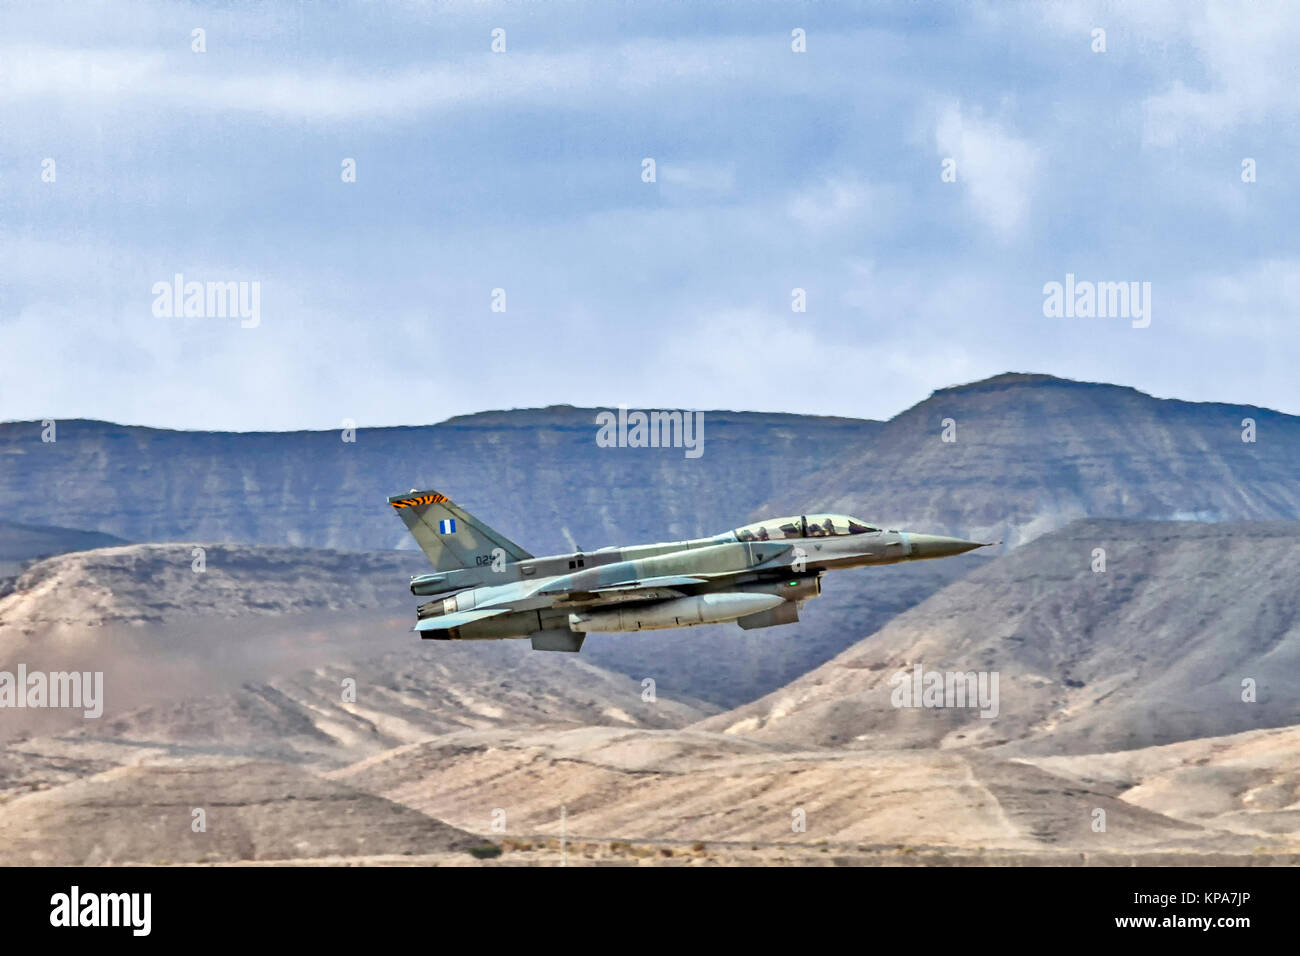 Greek Air Force General Dynamics F-16C Block 52+ in flight over the desert. Photographed at the  “Blue-Flag” 2017, an international aerial training ex Stock Photo